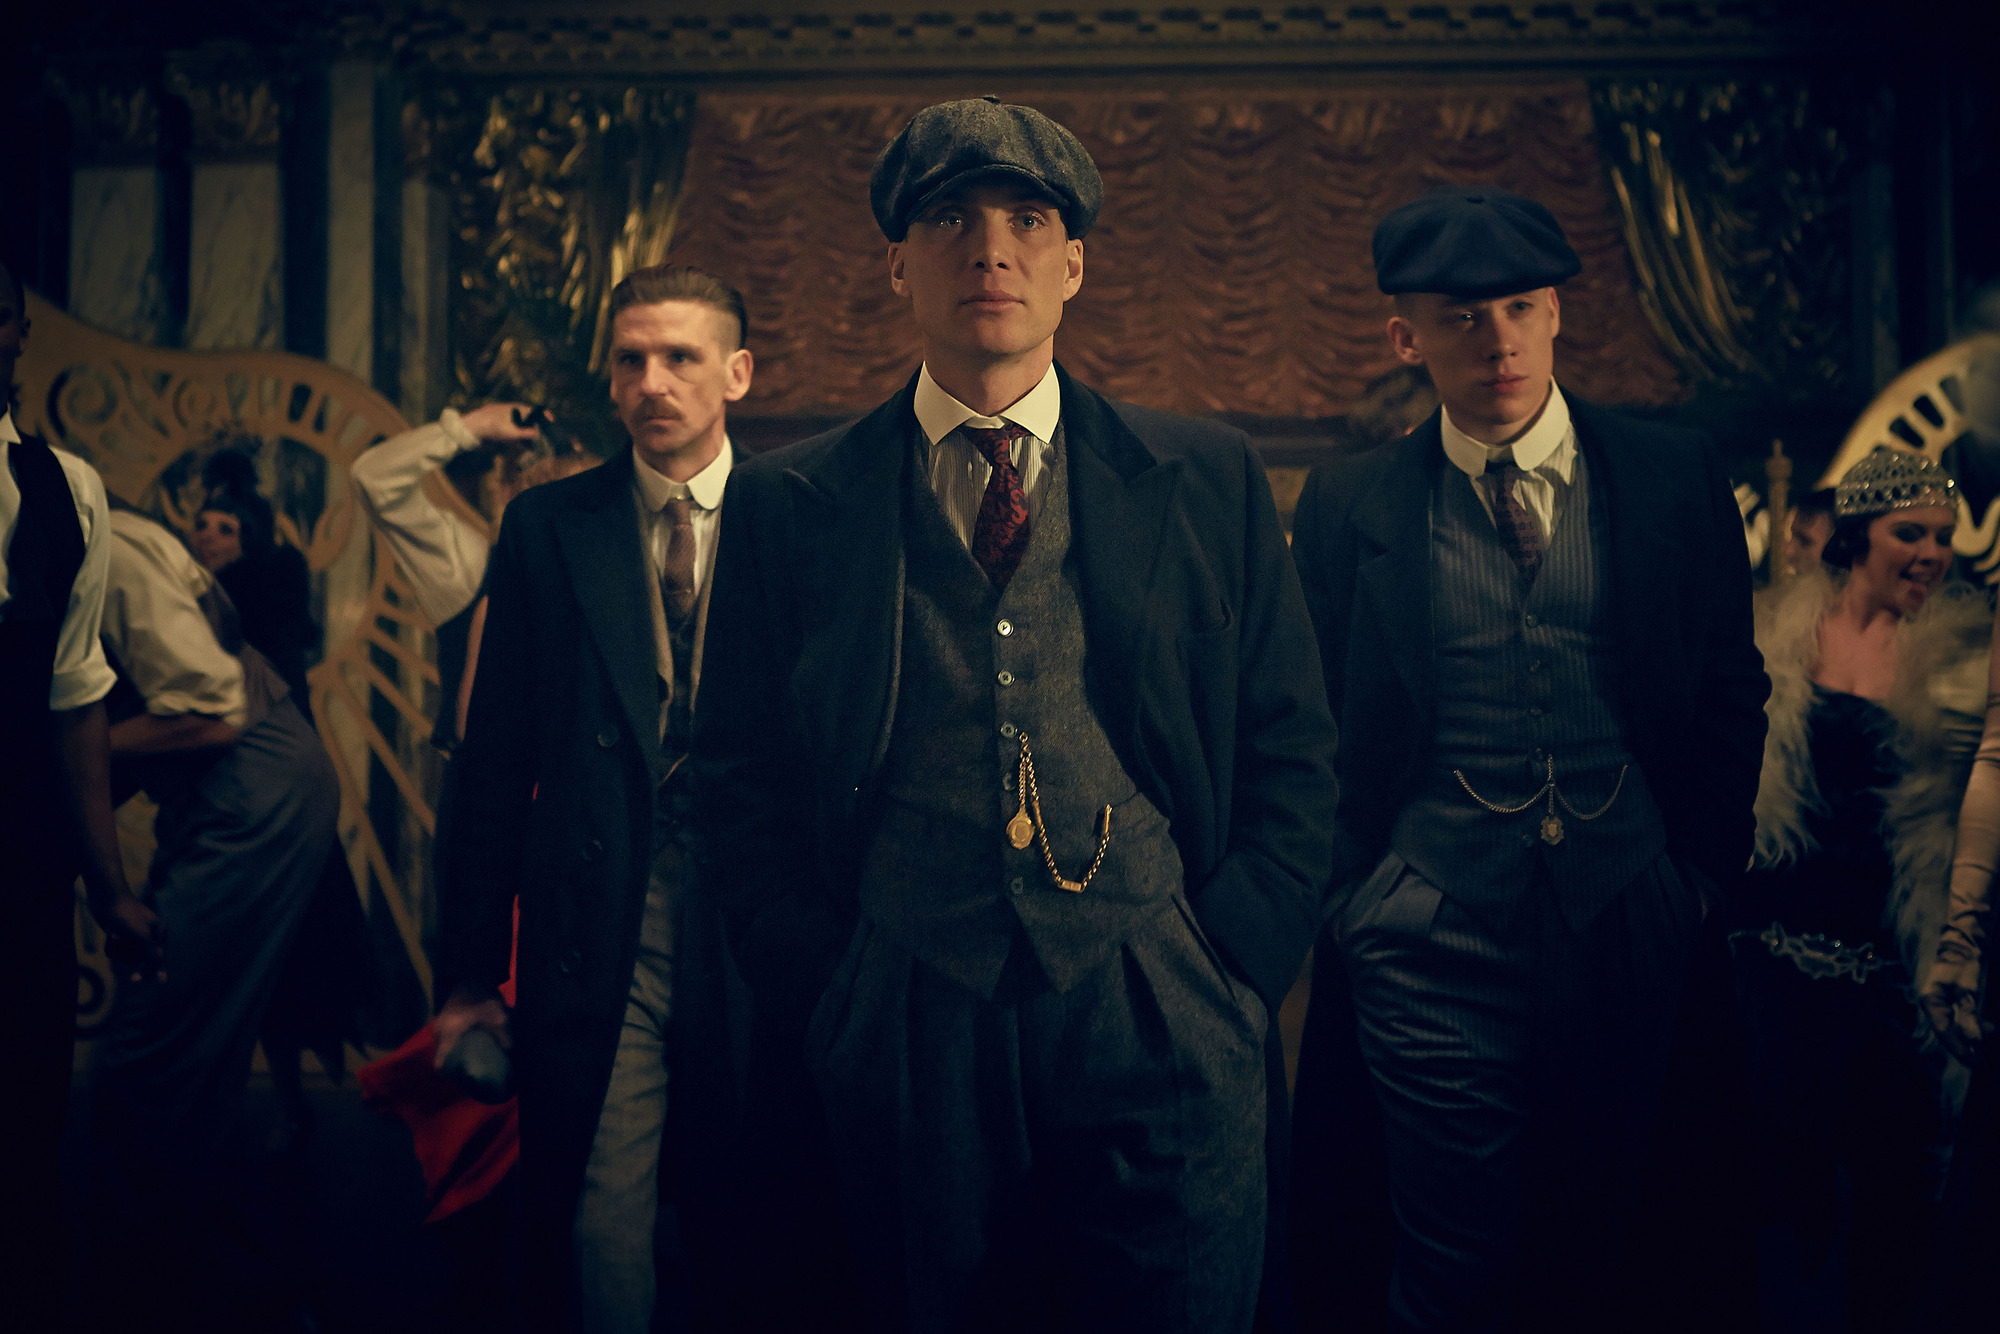 Image About Peaky Blinders